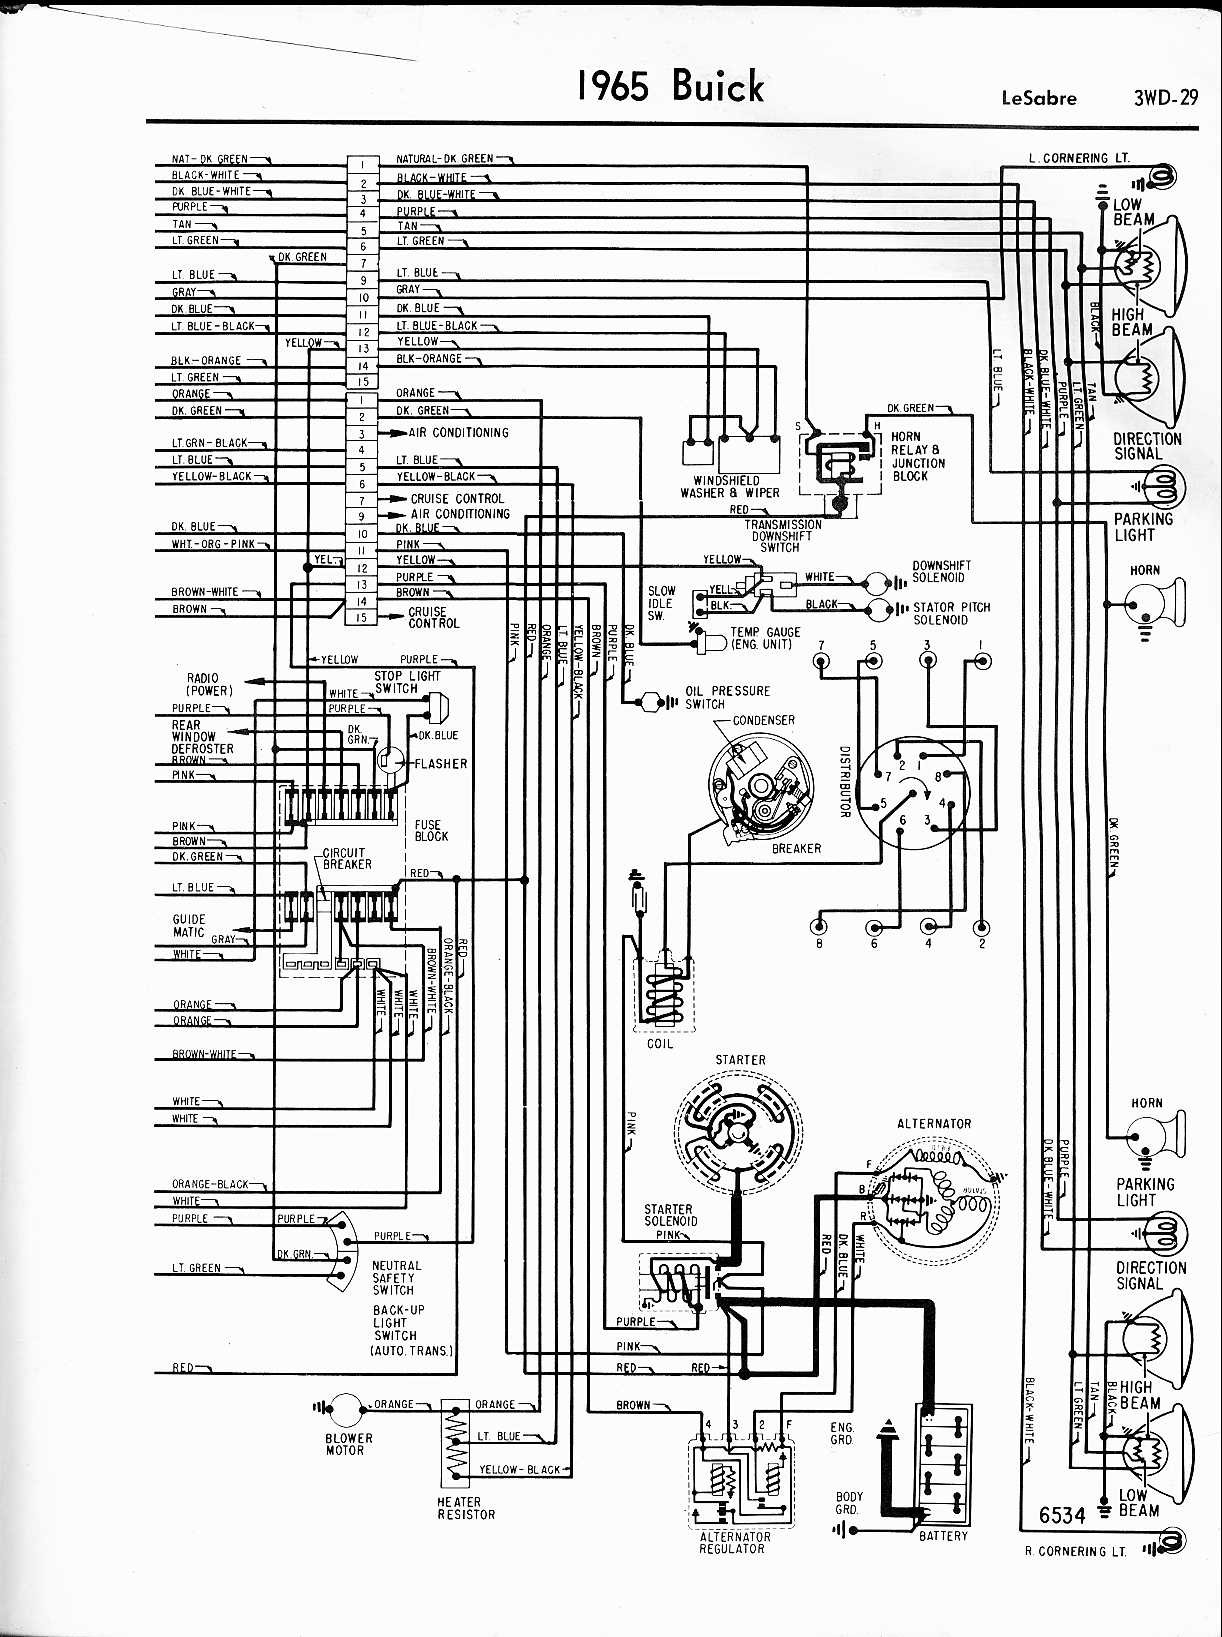 2001 Buick Lesabre Engine Diagram Free Buick Wiring Diagrams Data Schematics Wiring Diagram • Of 2001 Buick Lesabre Engine Diagram